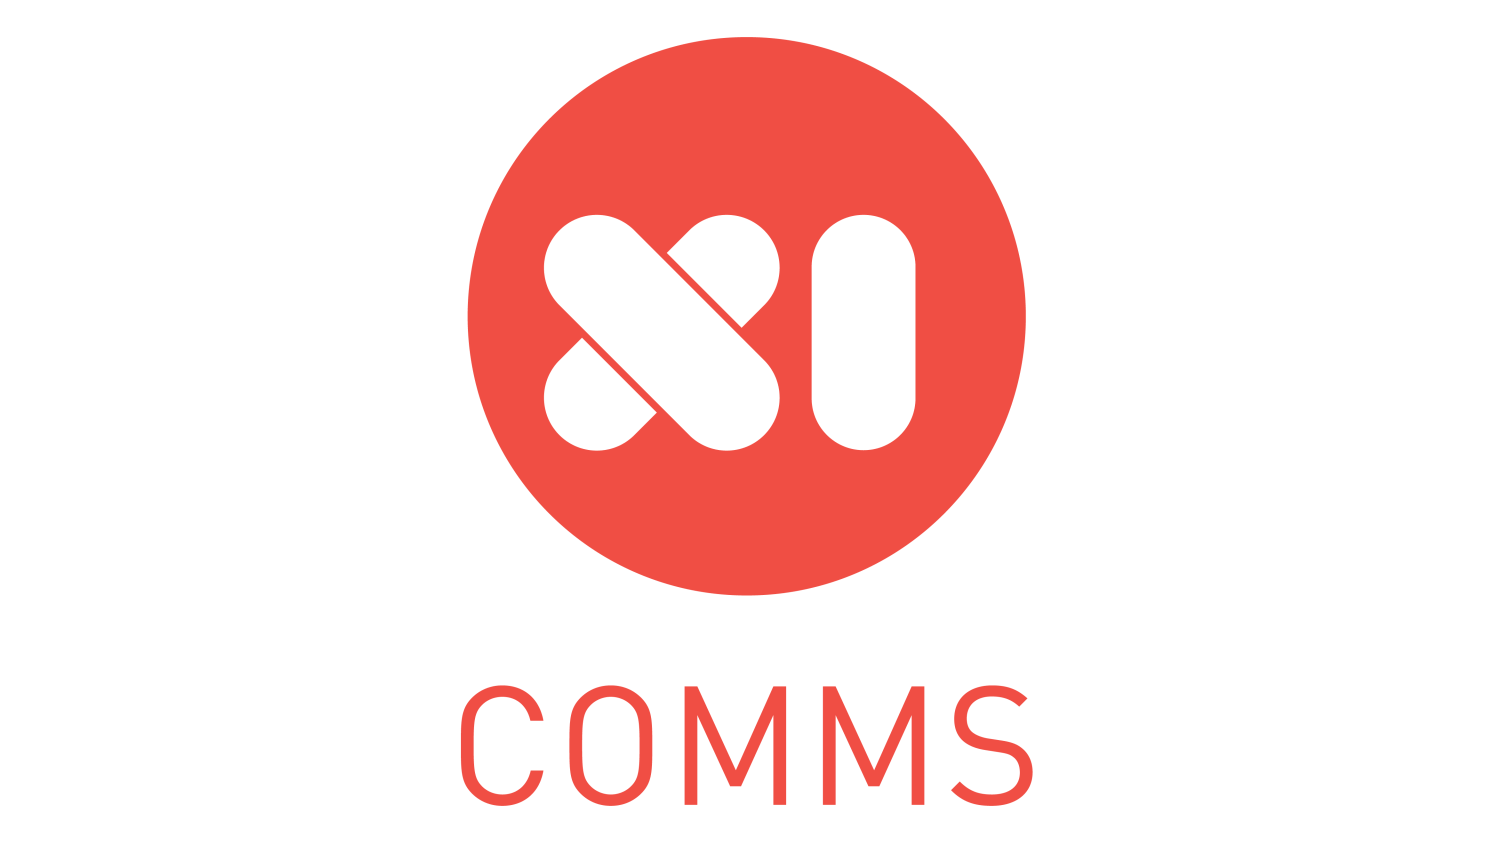 Xi Comms logo for Wild & Co client success stories